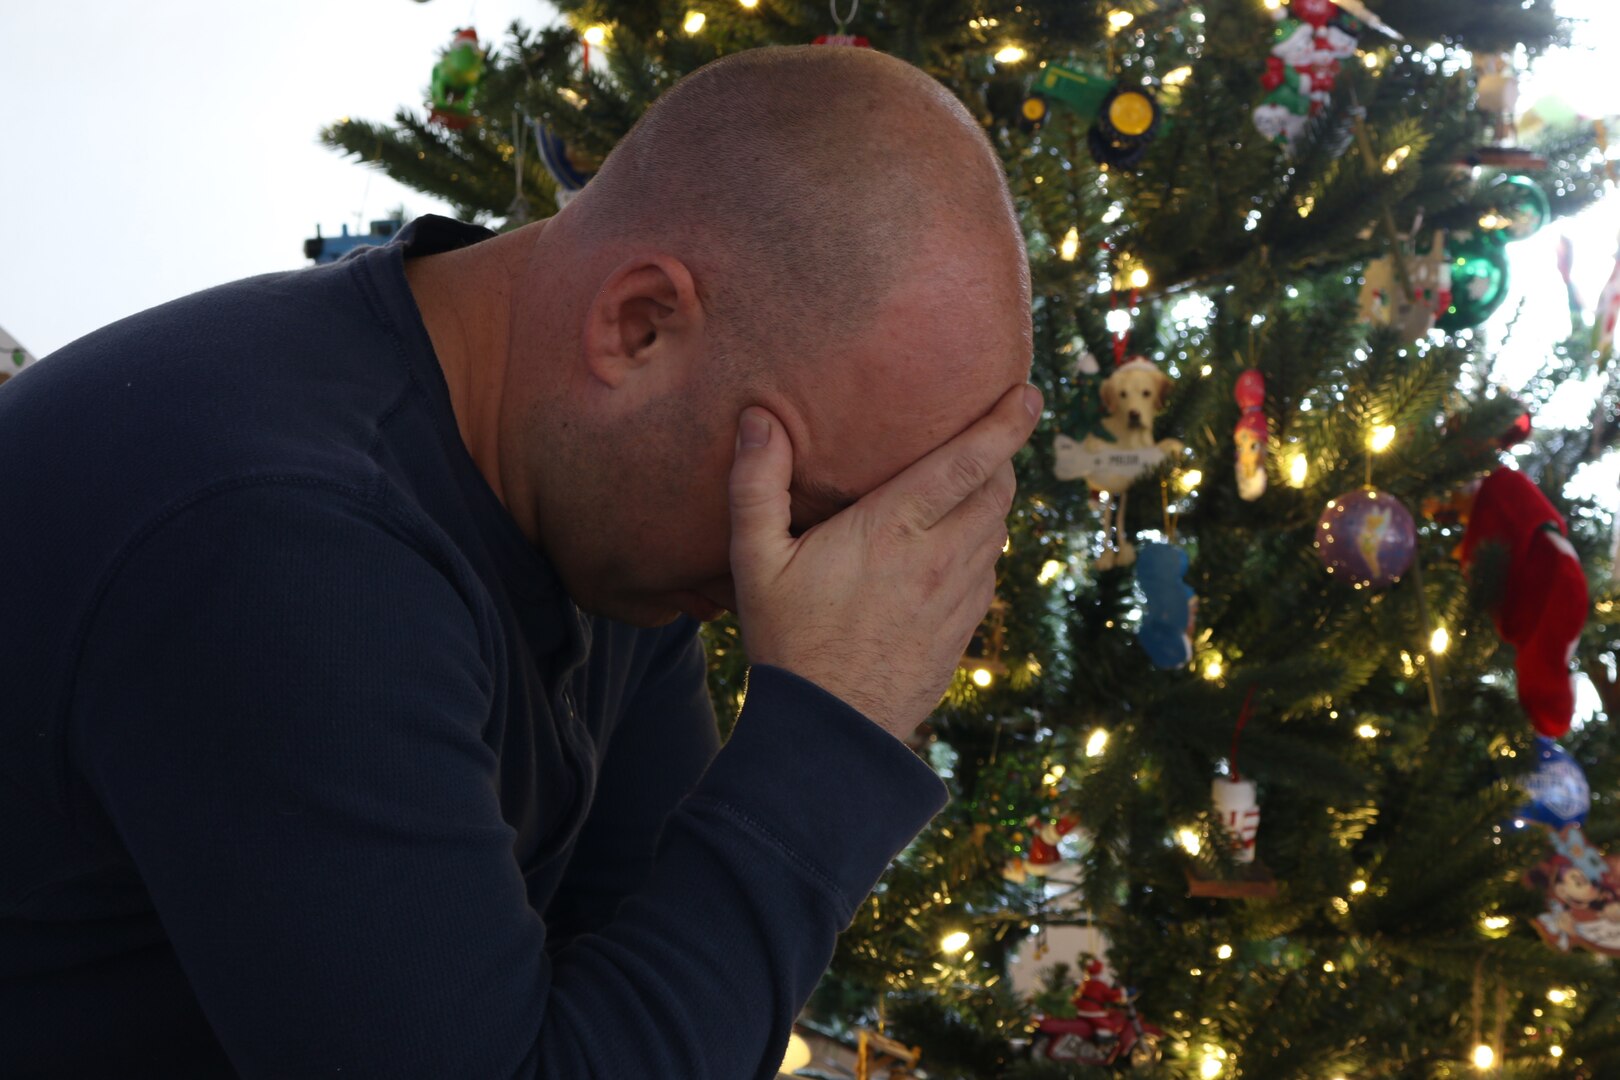 The holiday season can be stressful for many people. But there are some ways to ease the pressure.